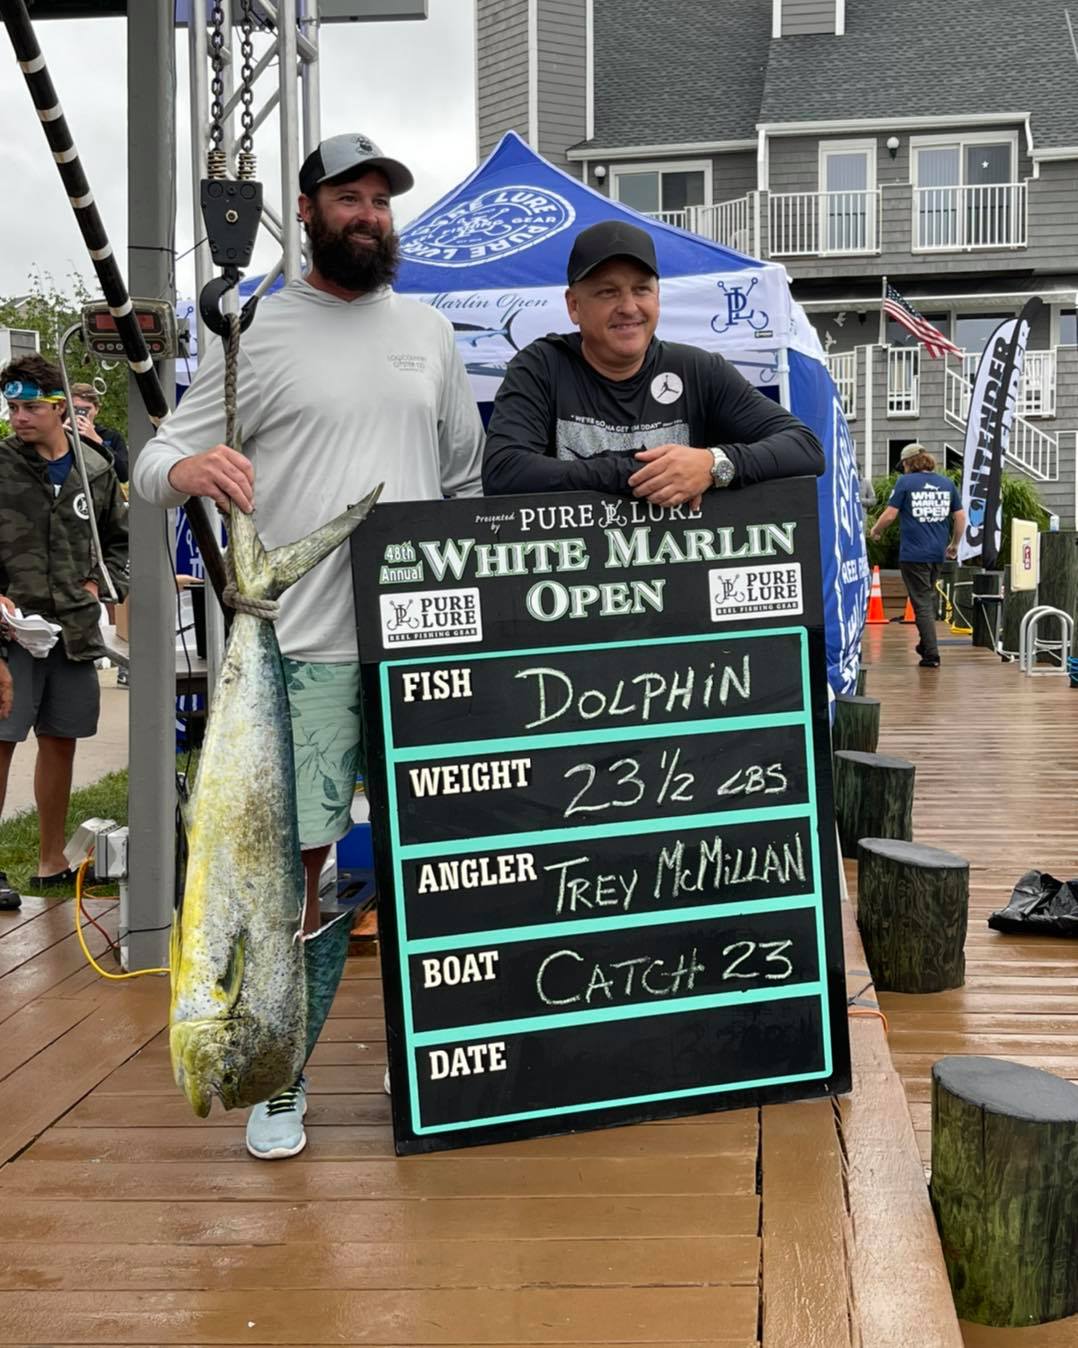 Michael Jordan’s Catch 23 Wins $20,000 on Day 3 of the 2021 White Marlin Open